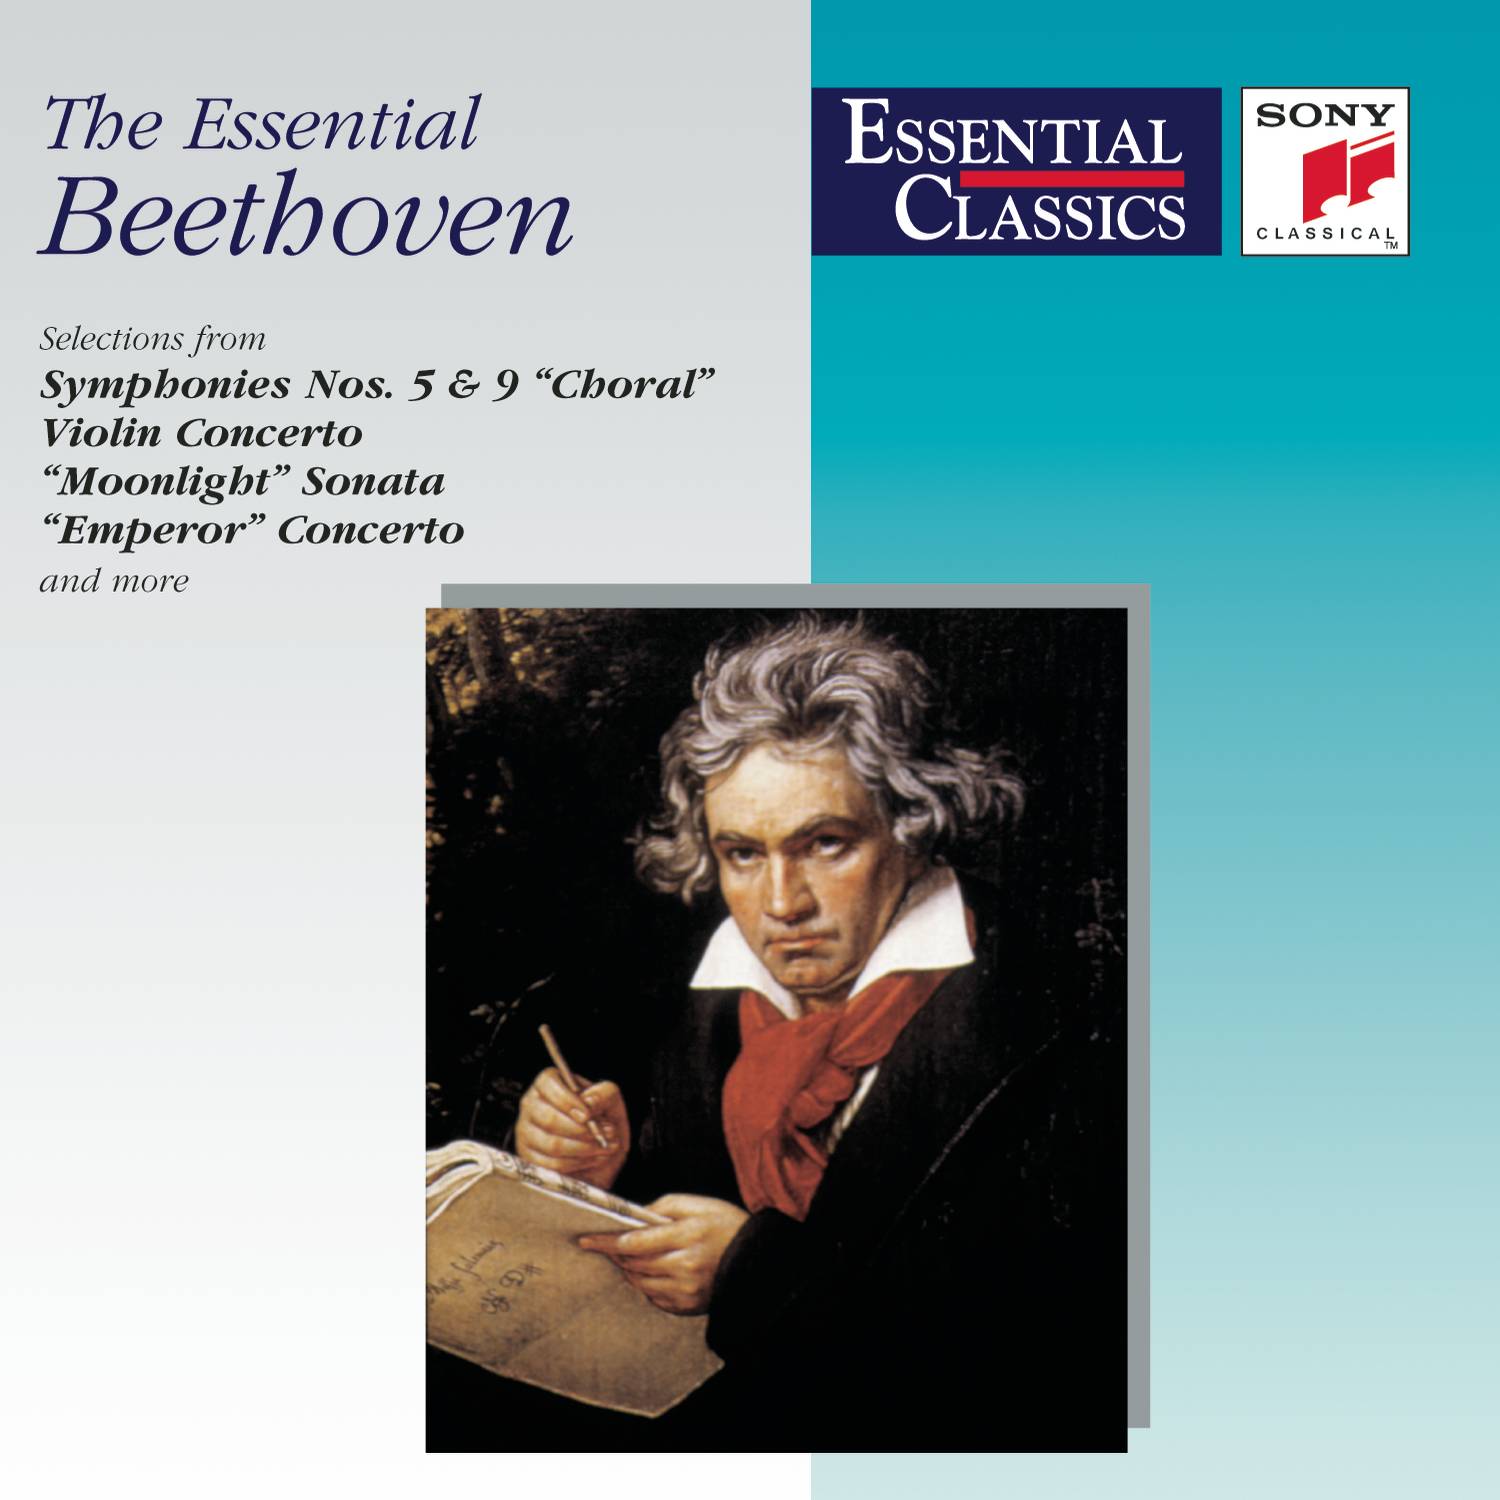 The Essential Beethoven